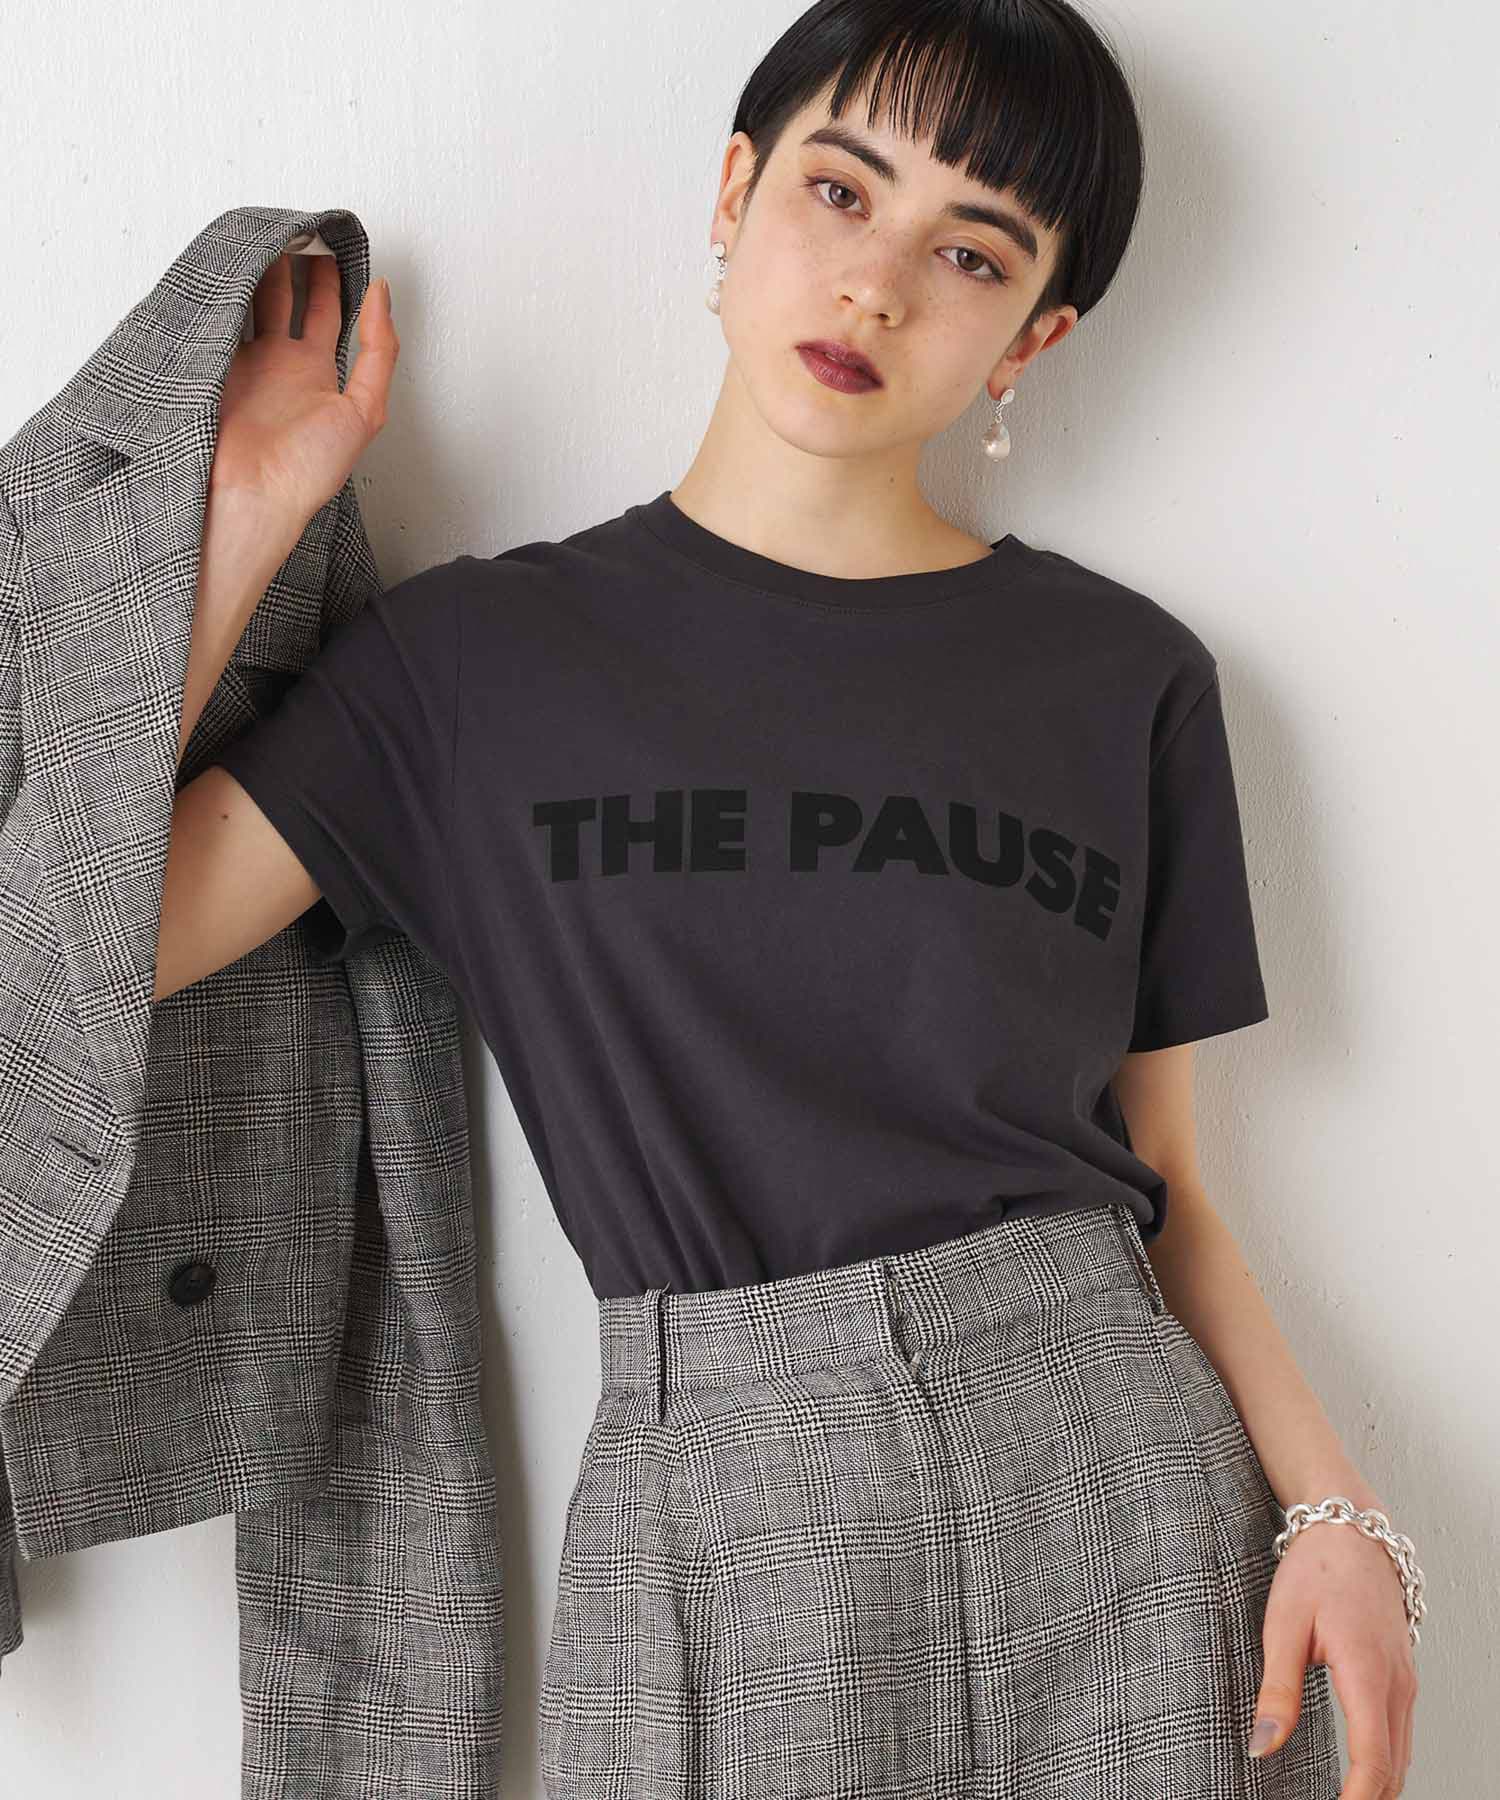 THE PAUSE】THE PAUSE Tシャツ | Whim Gazette(ウィム ガゼット